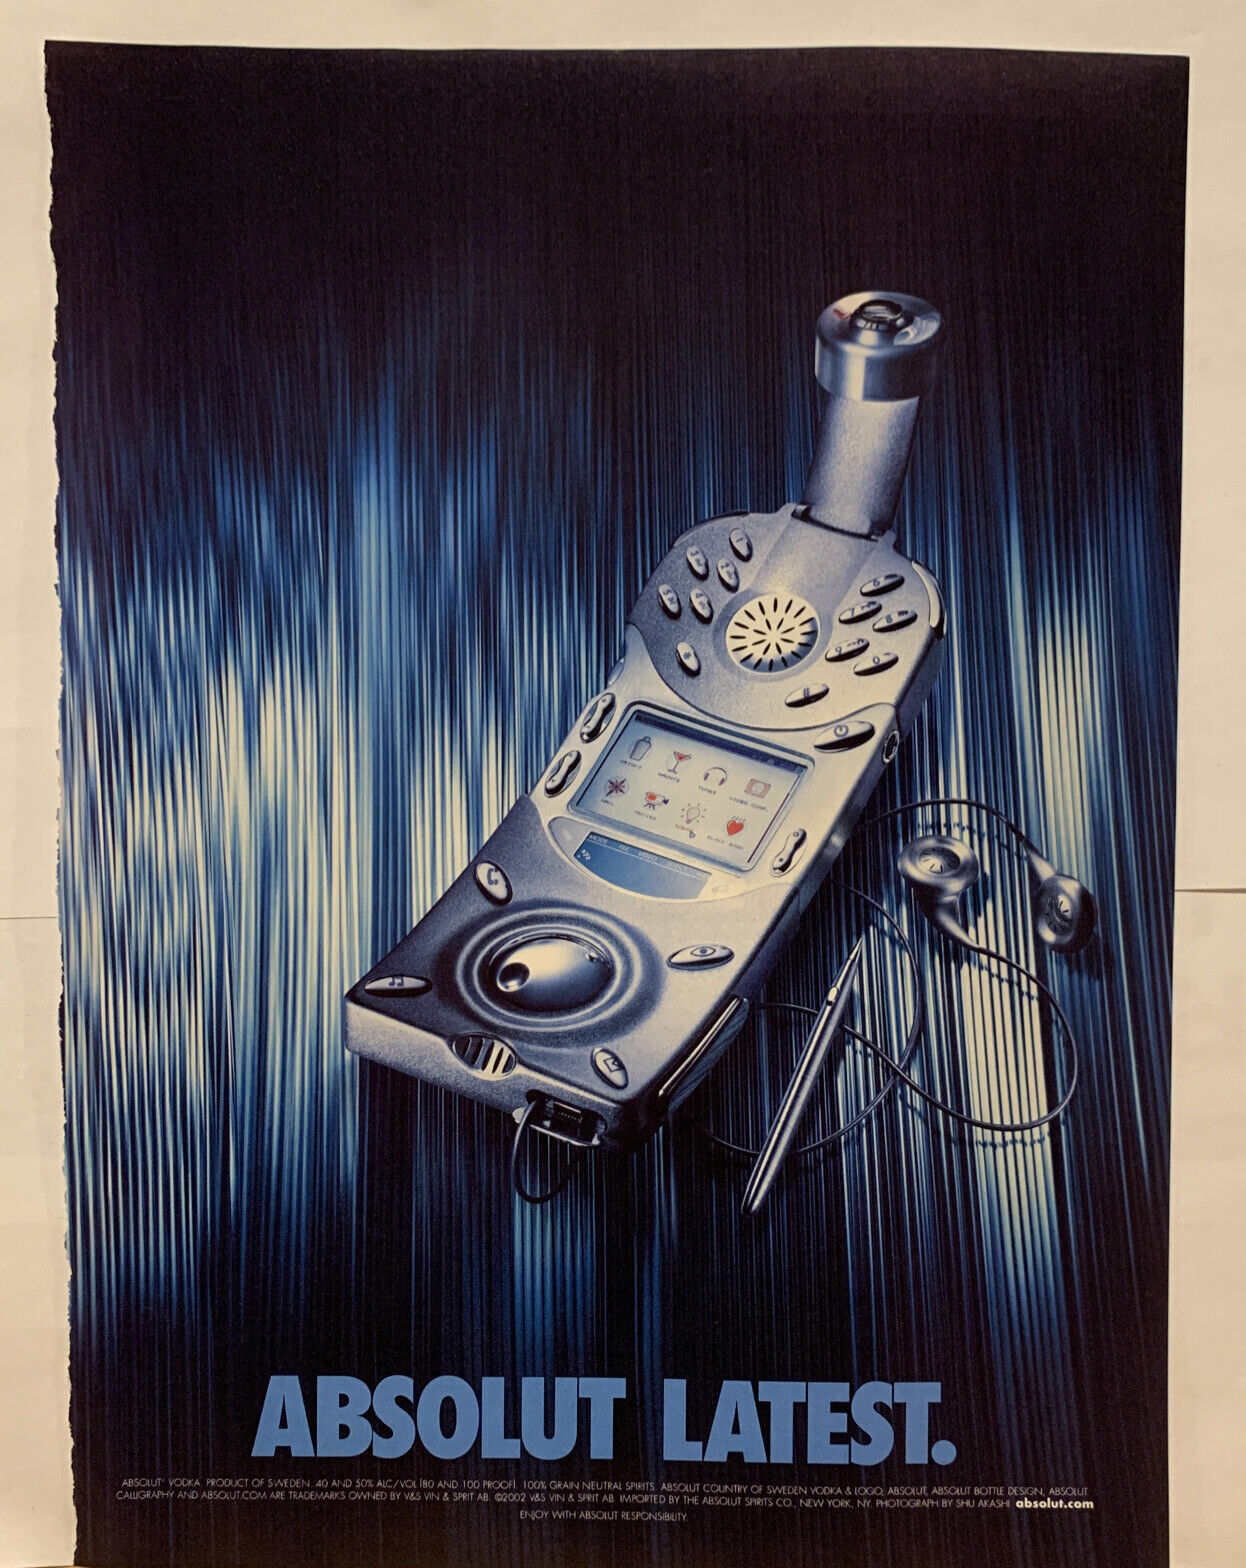 2002 Absolut Vodka "Absolut Latest" Cell Phone Original Color Print Ad - $4.20